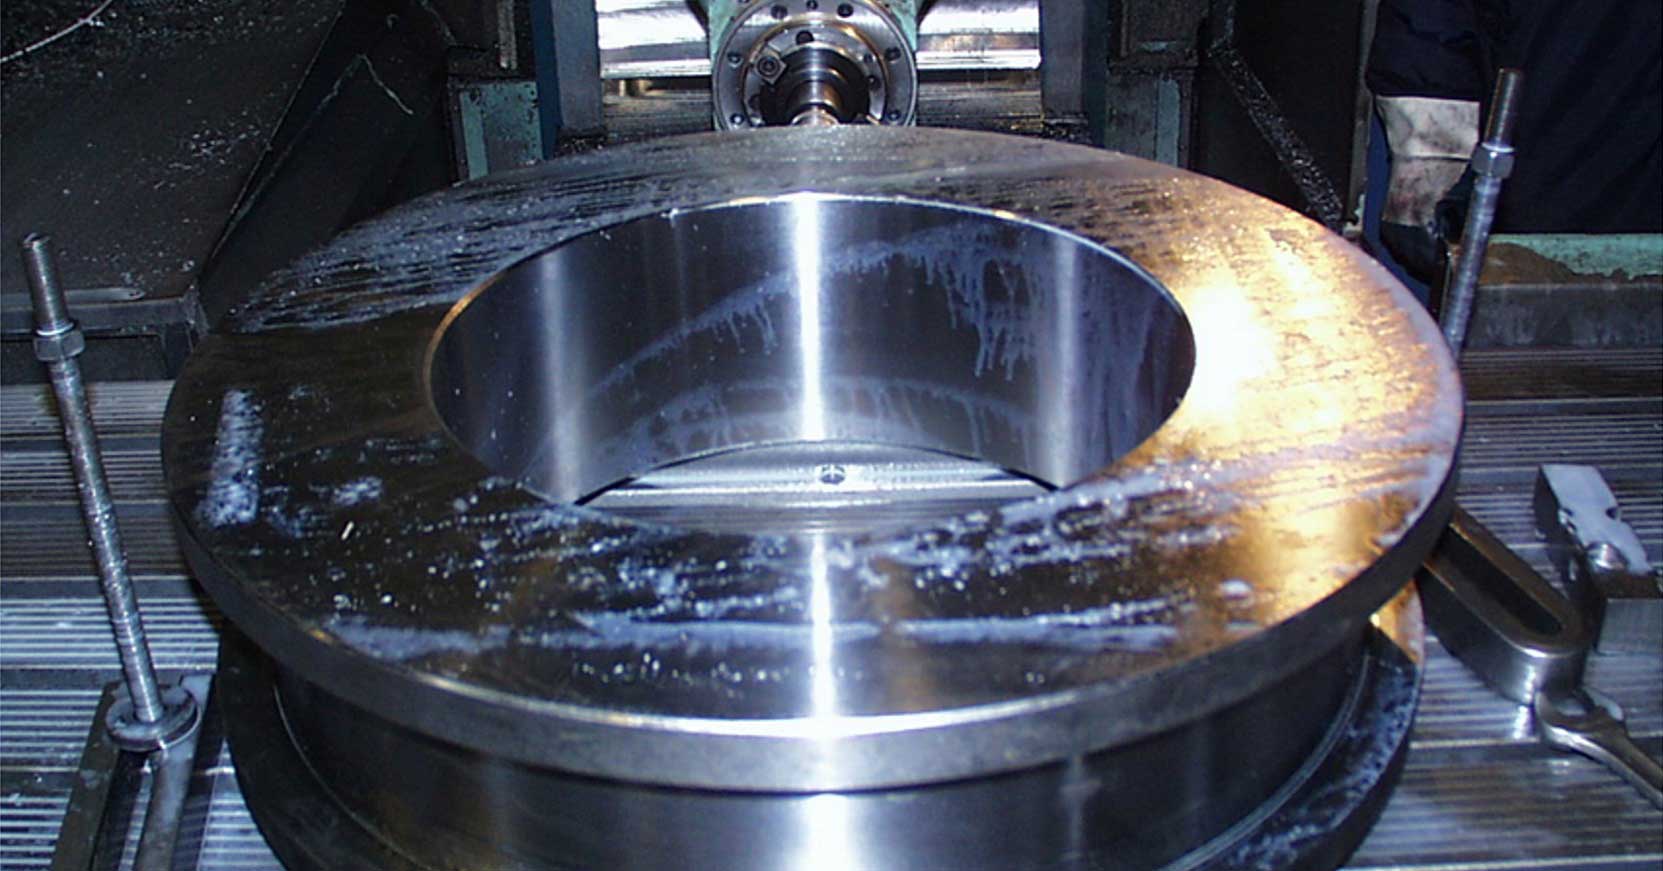 Frantoparts: Production of spares for every kind of machines